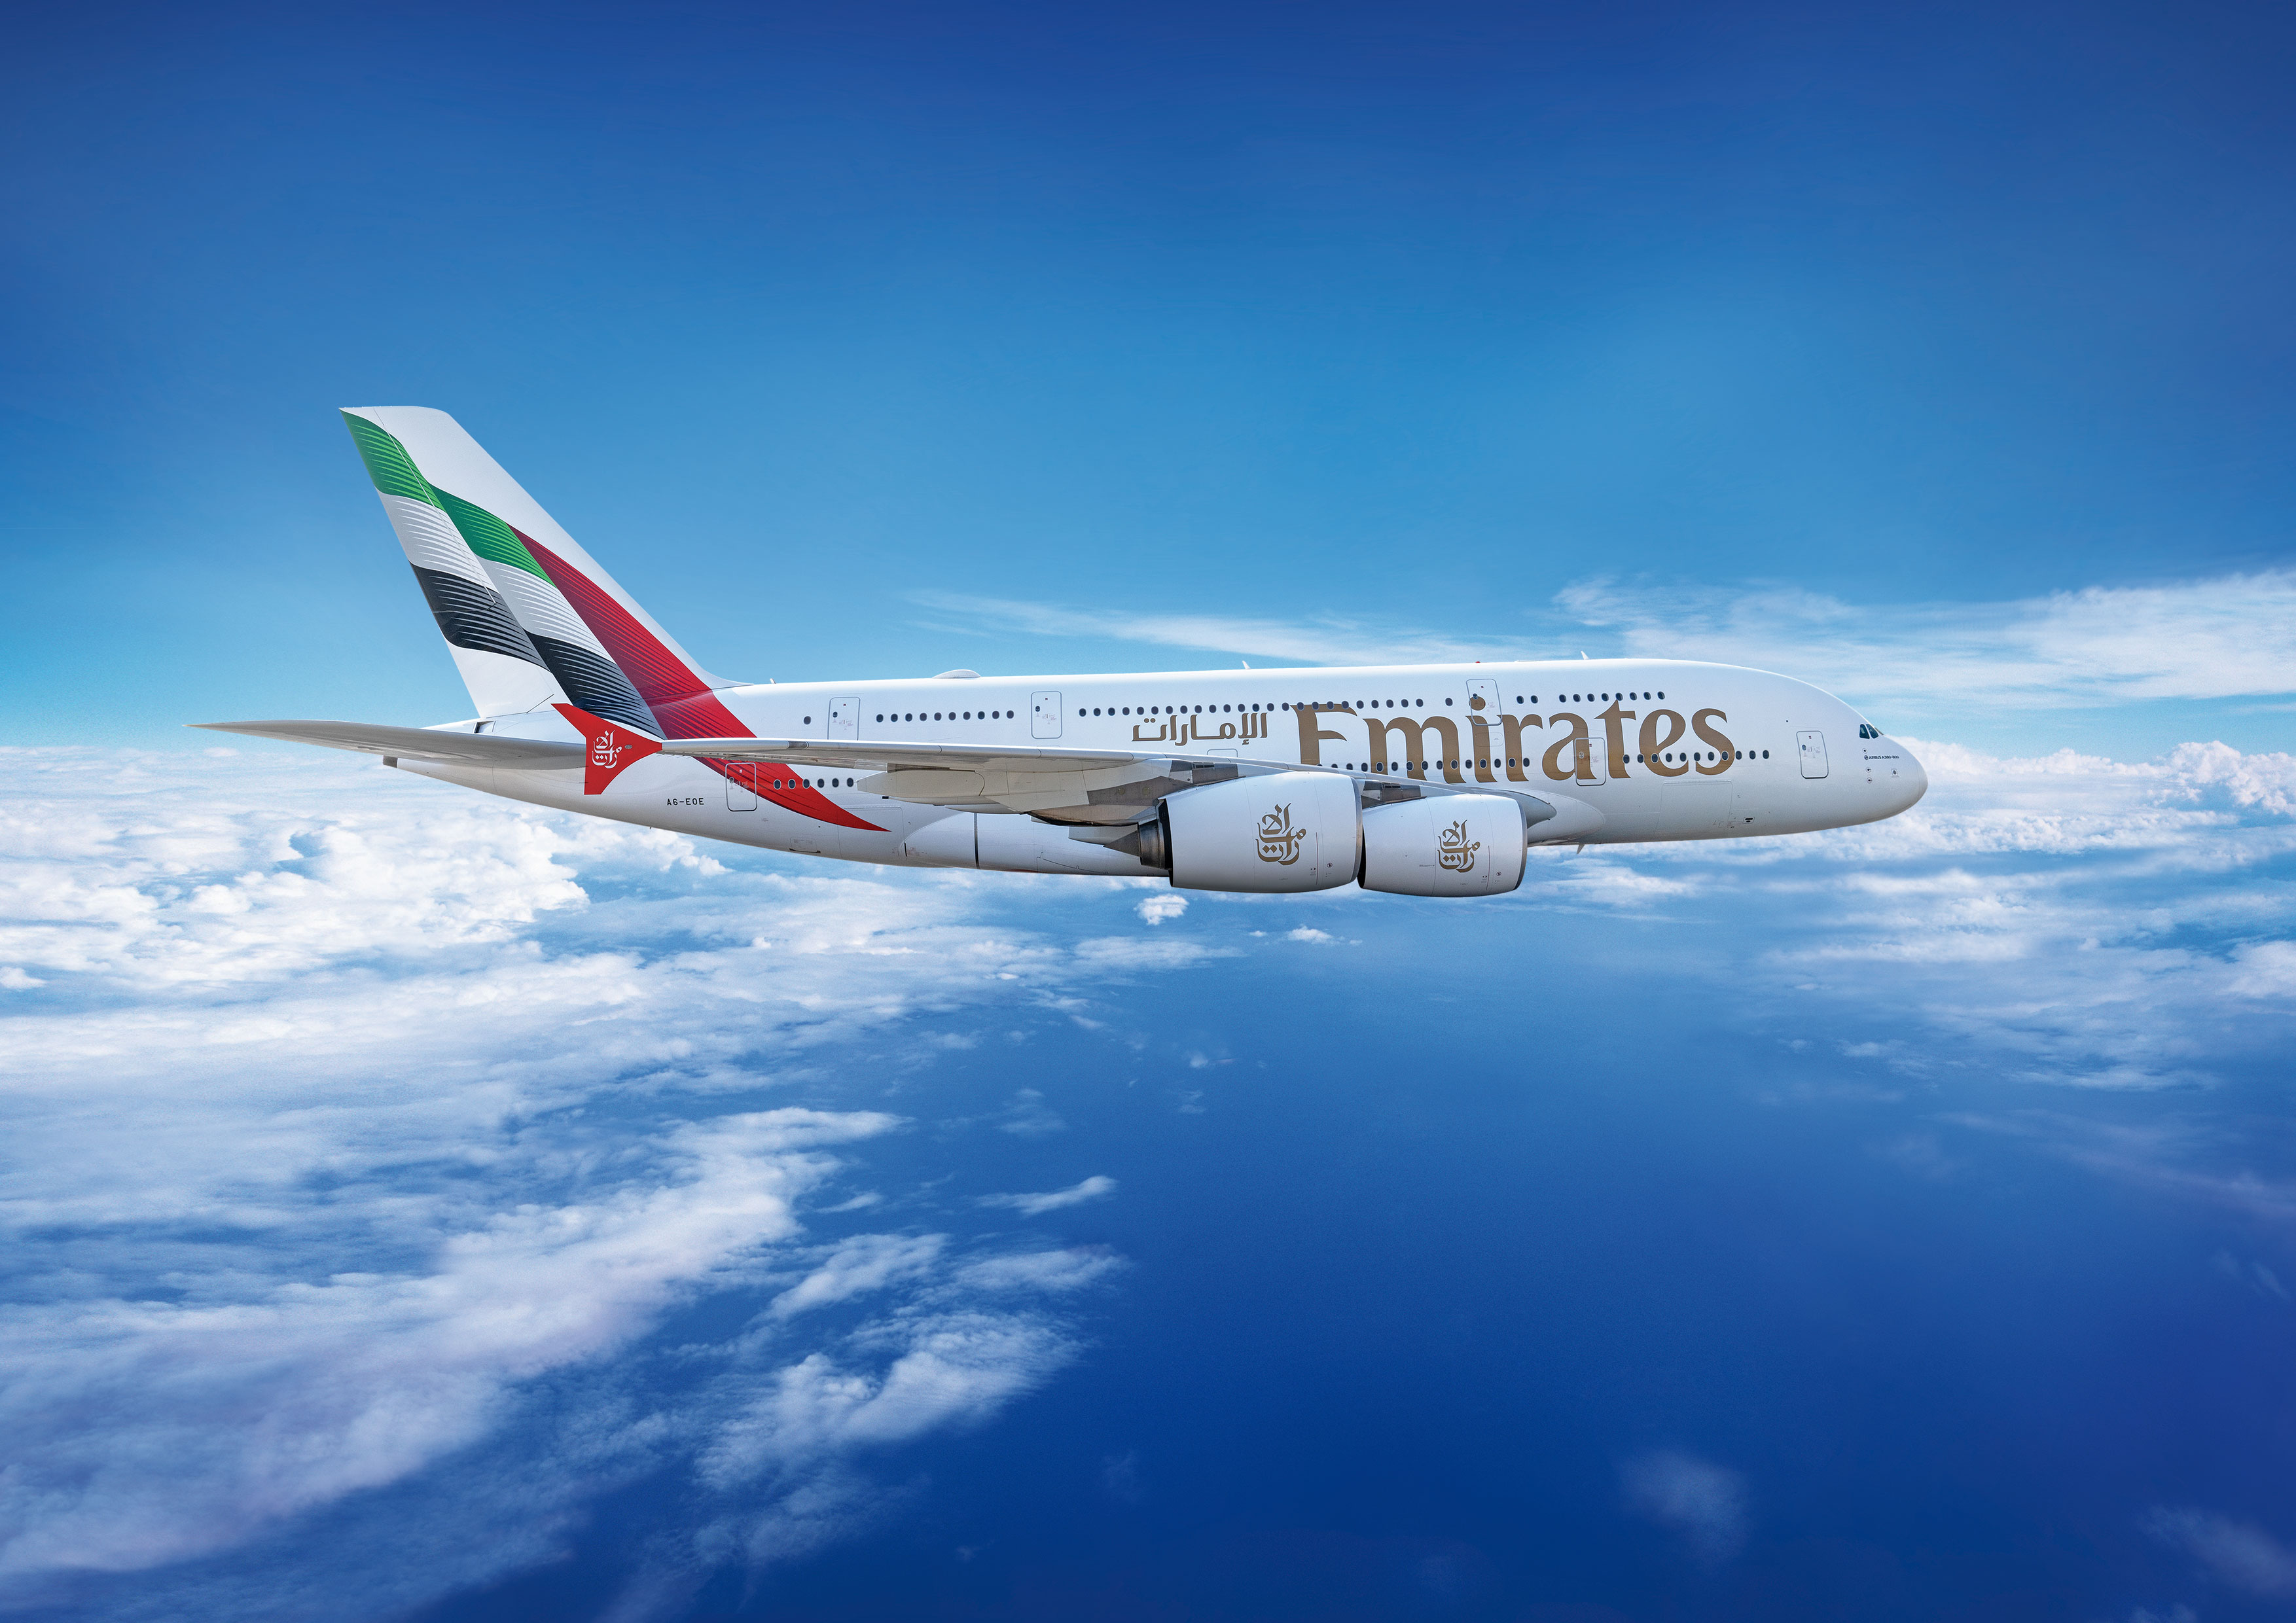 Emirates Airline Ranks In Top 5 For World's Top 100 Airline Awards